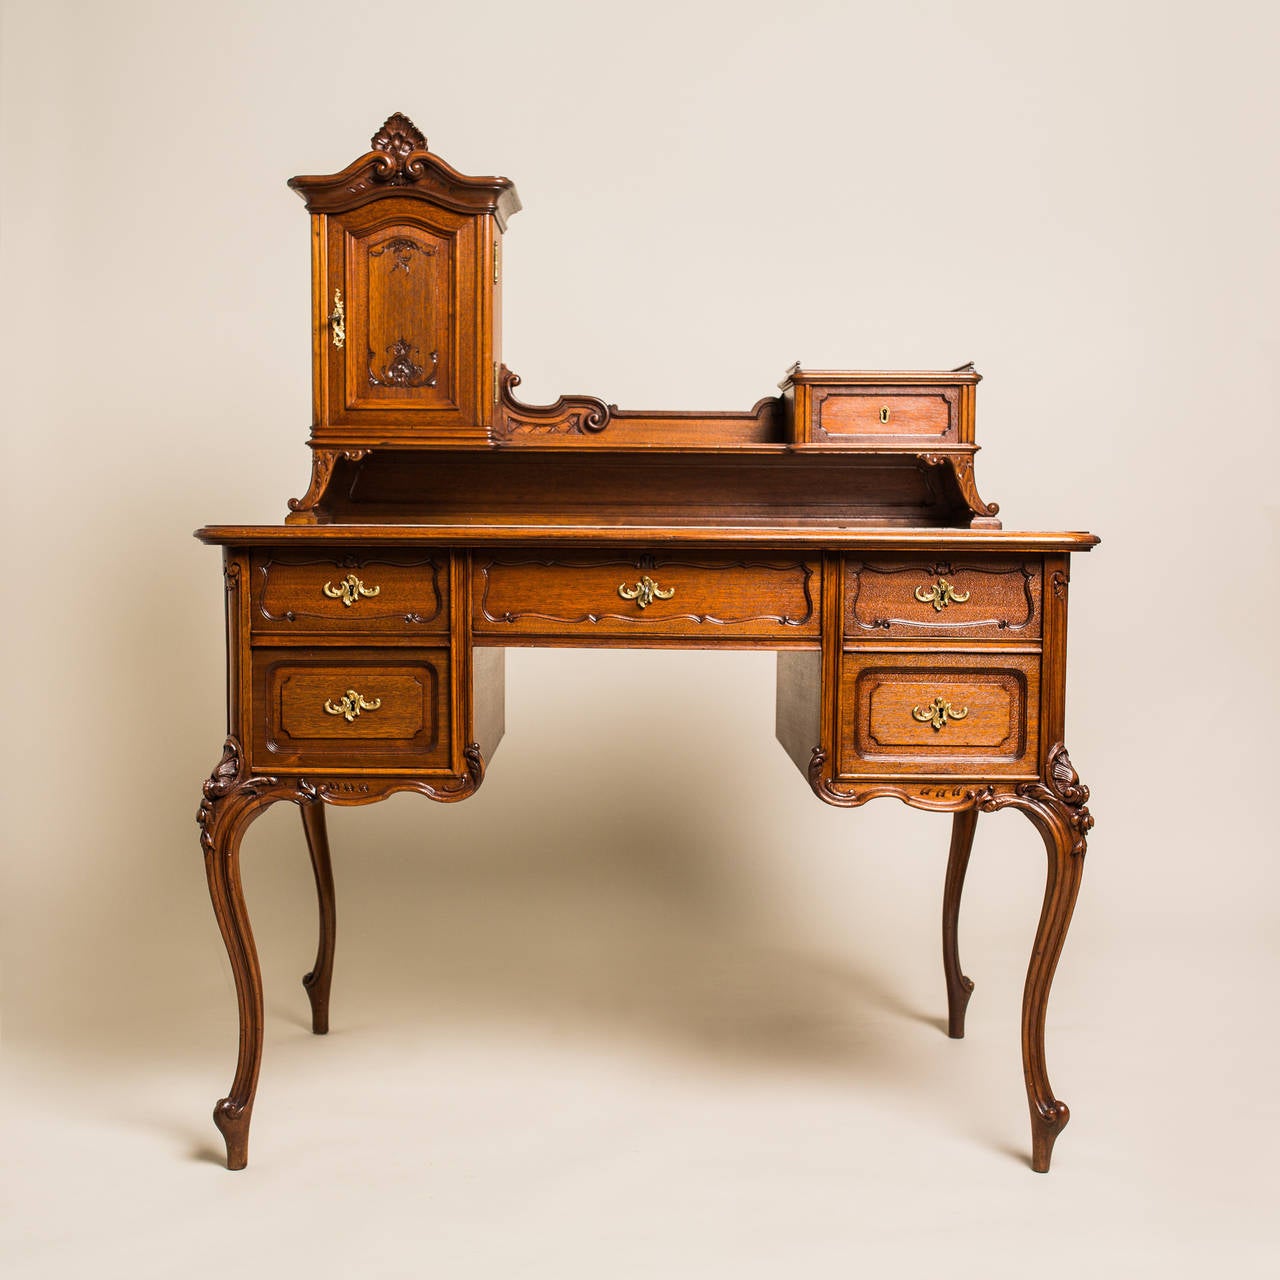 Amazing late 19th century oakwood writing desk Baroque Revival, Austria, circa 1880. This also so-called “Pfeiferl” Baroque writing desk was constructed from spruce wood and veneered with beautiful oak veneer, sealed with a hand polished shellac